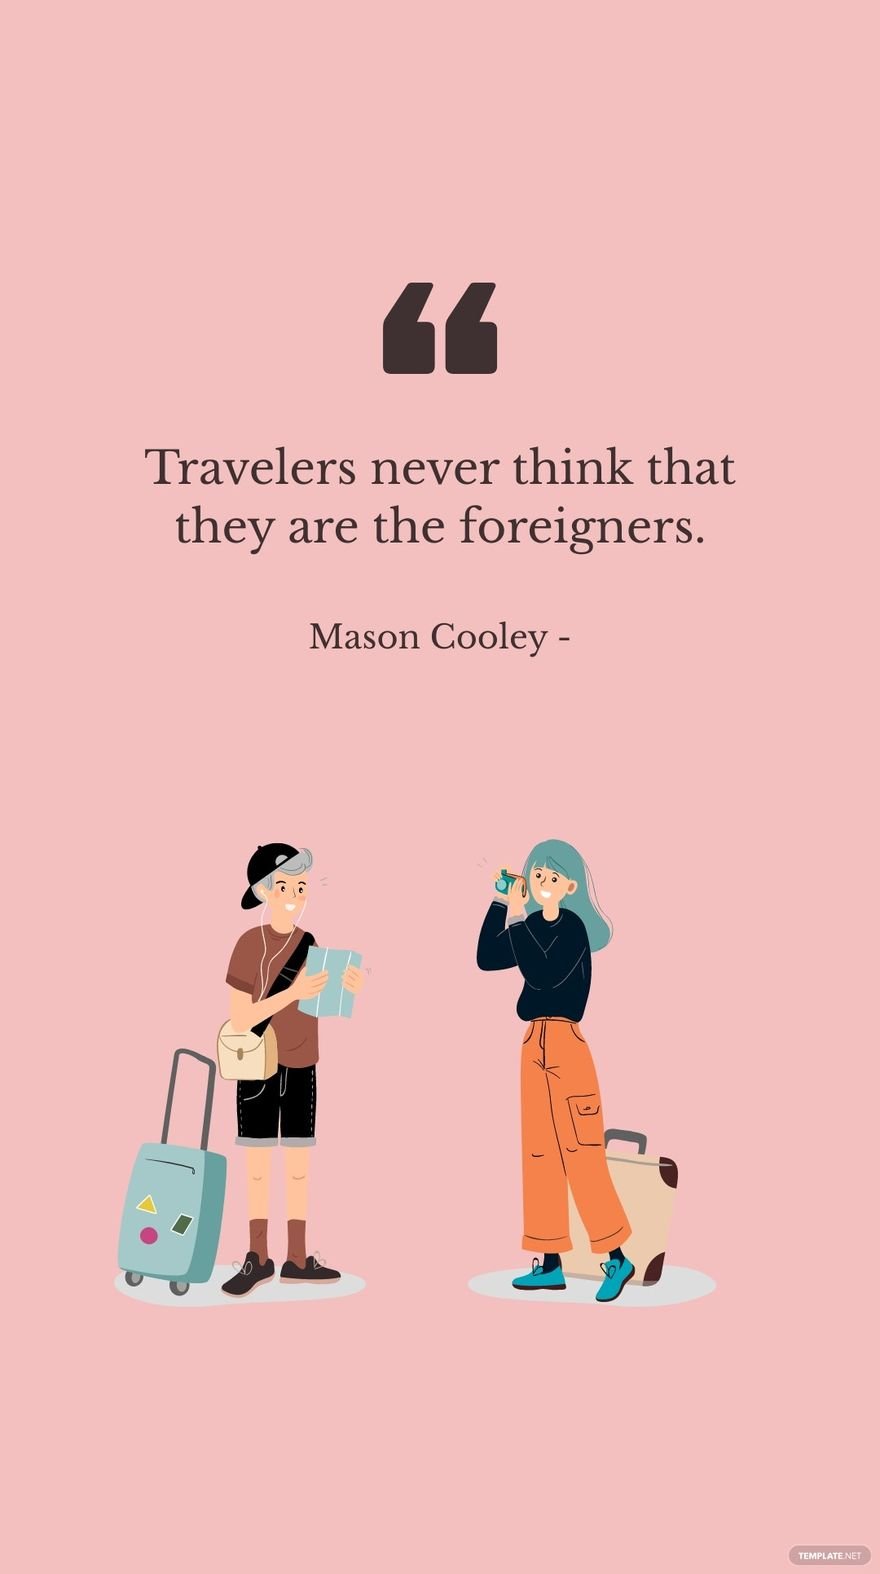 Mason Cooley - Travelers never think that they are the foreigners.